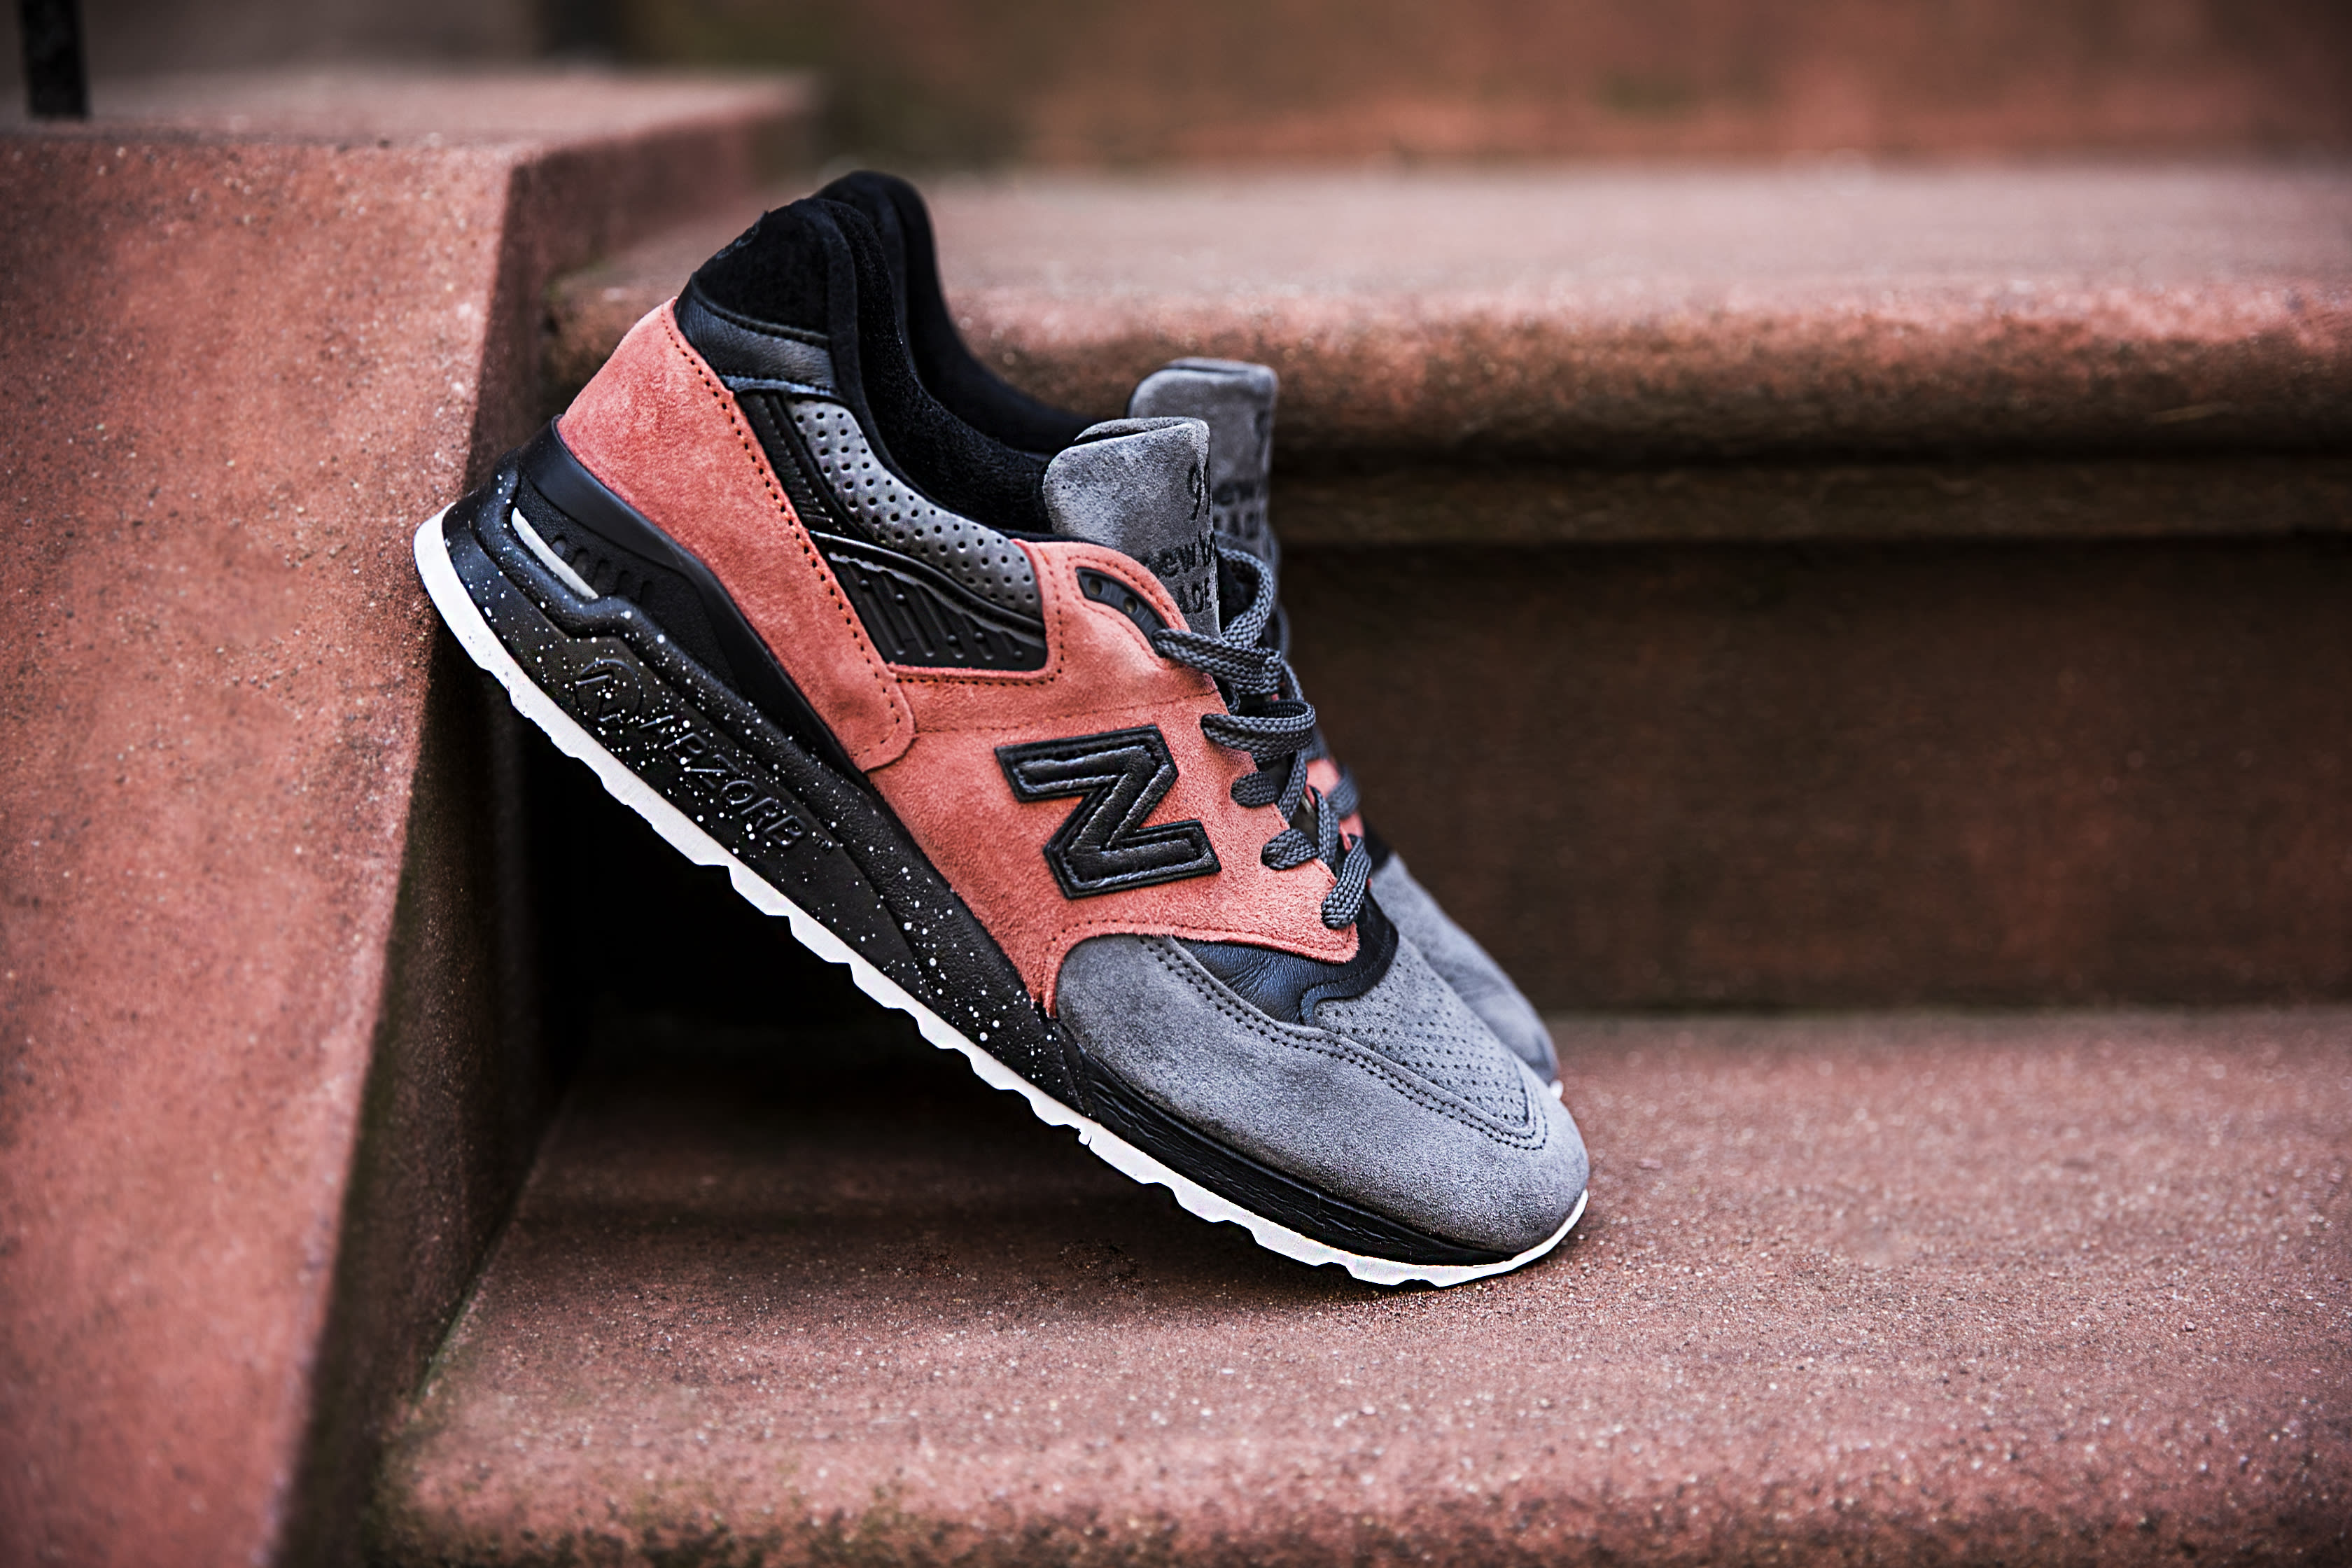 Todd Snyder x New Balance 998 NB1 &#x27;Sunset Pink&#x27; (Lateral)